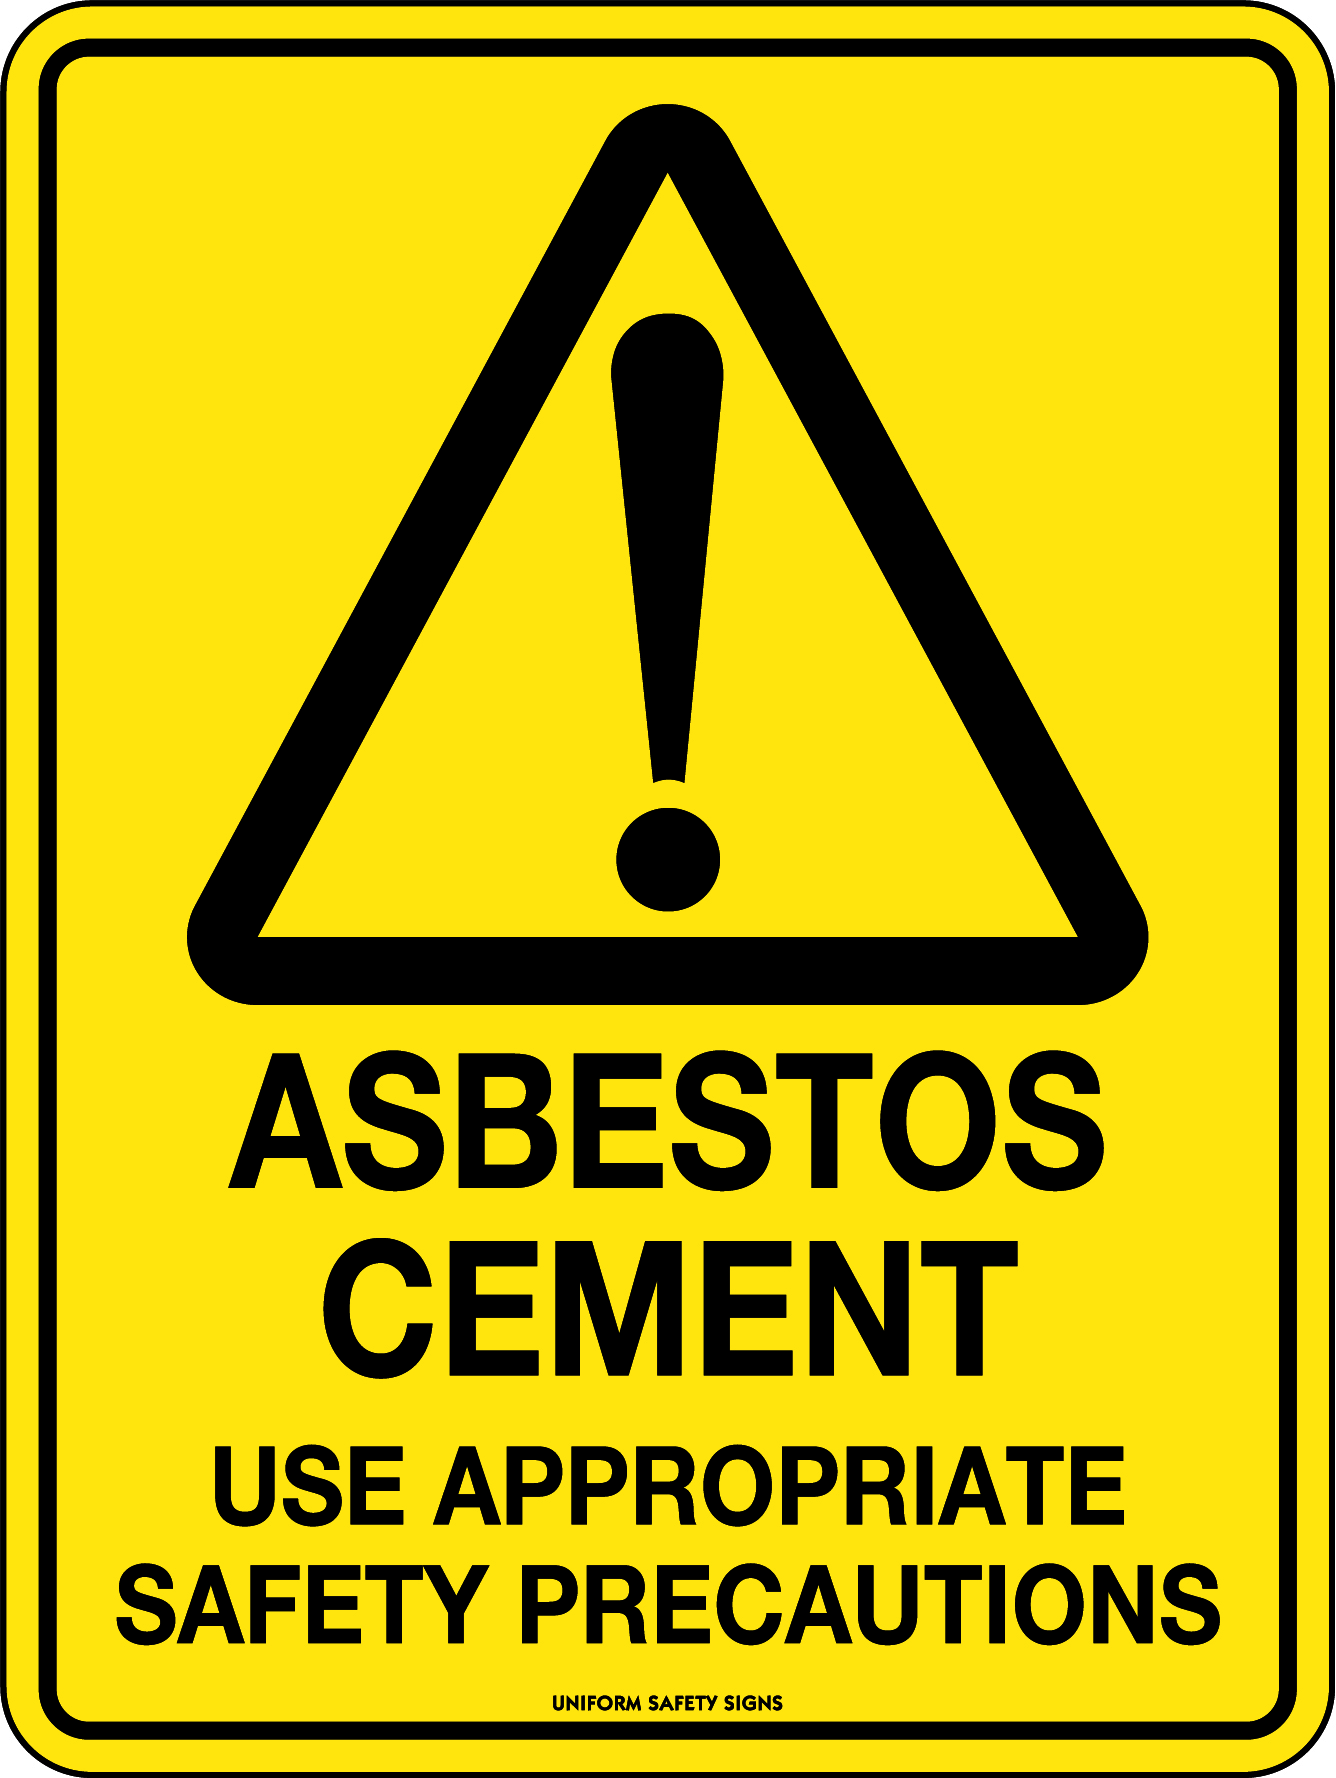 Asbestos Cement Use Appropriate Safety Precautions | USS